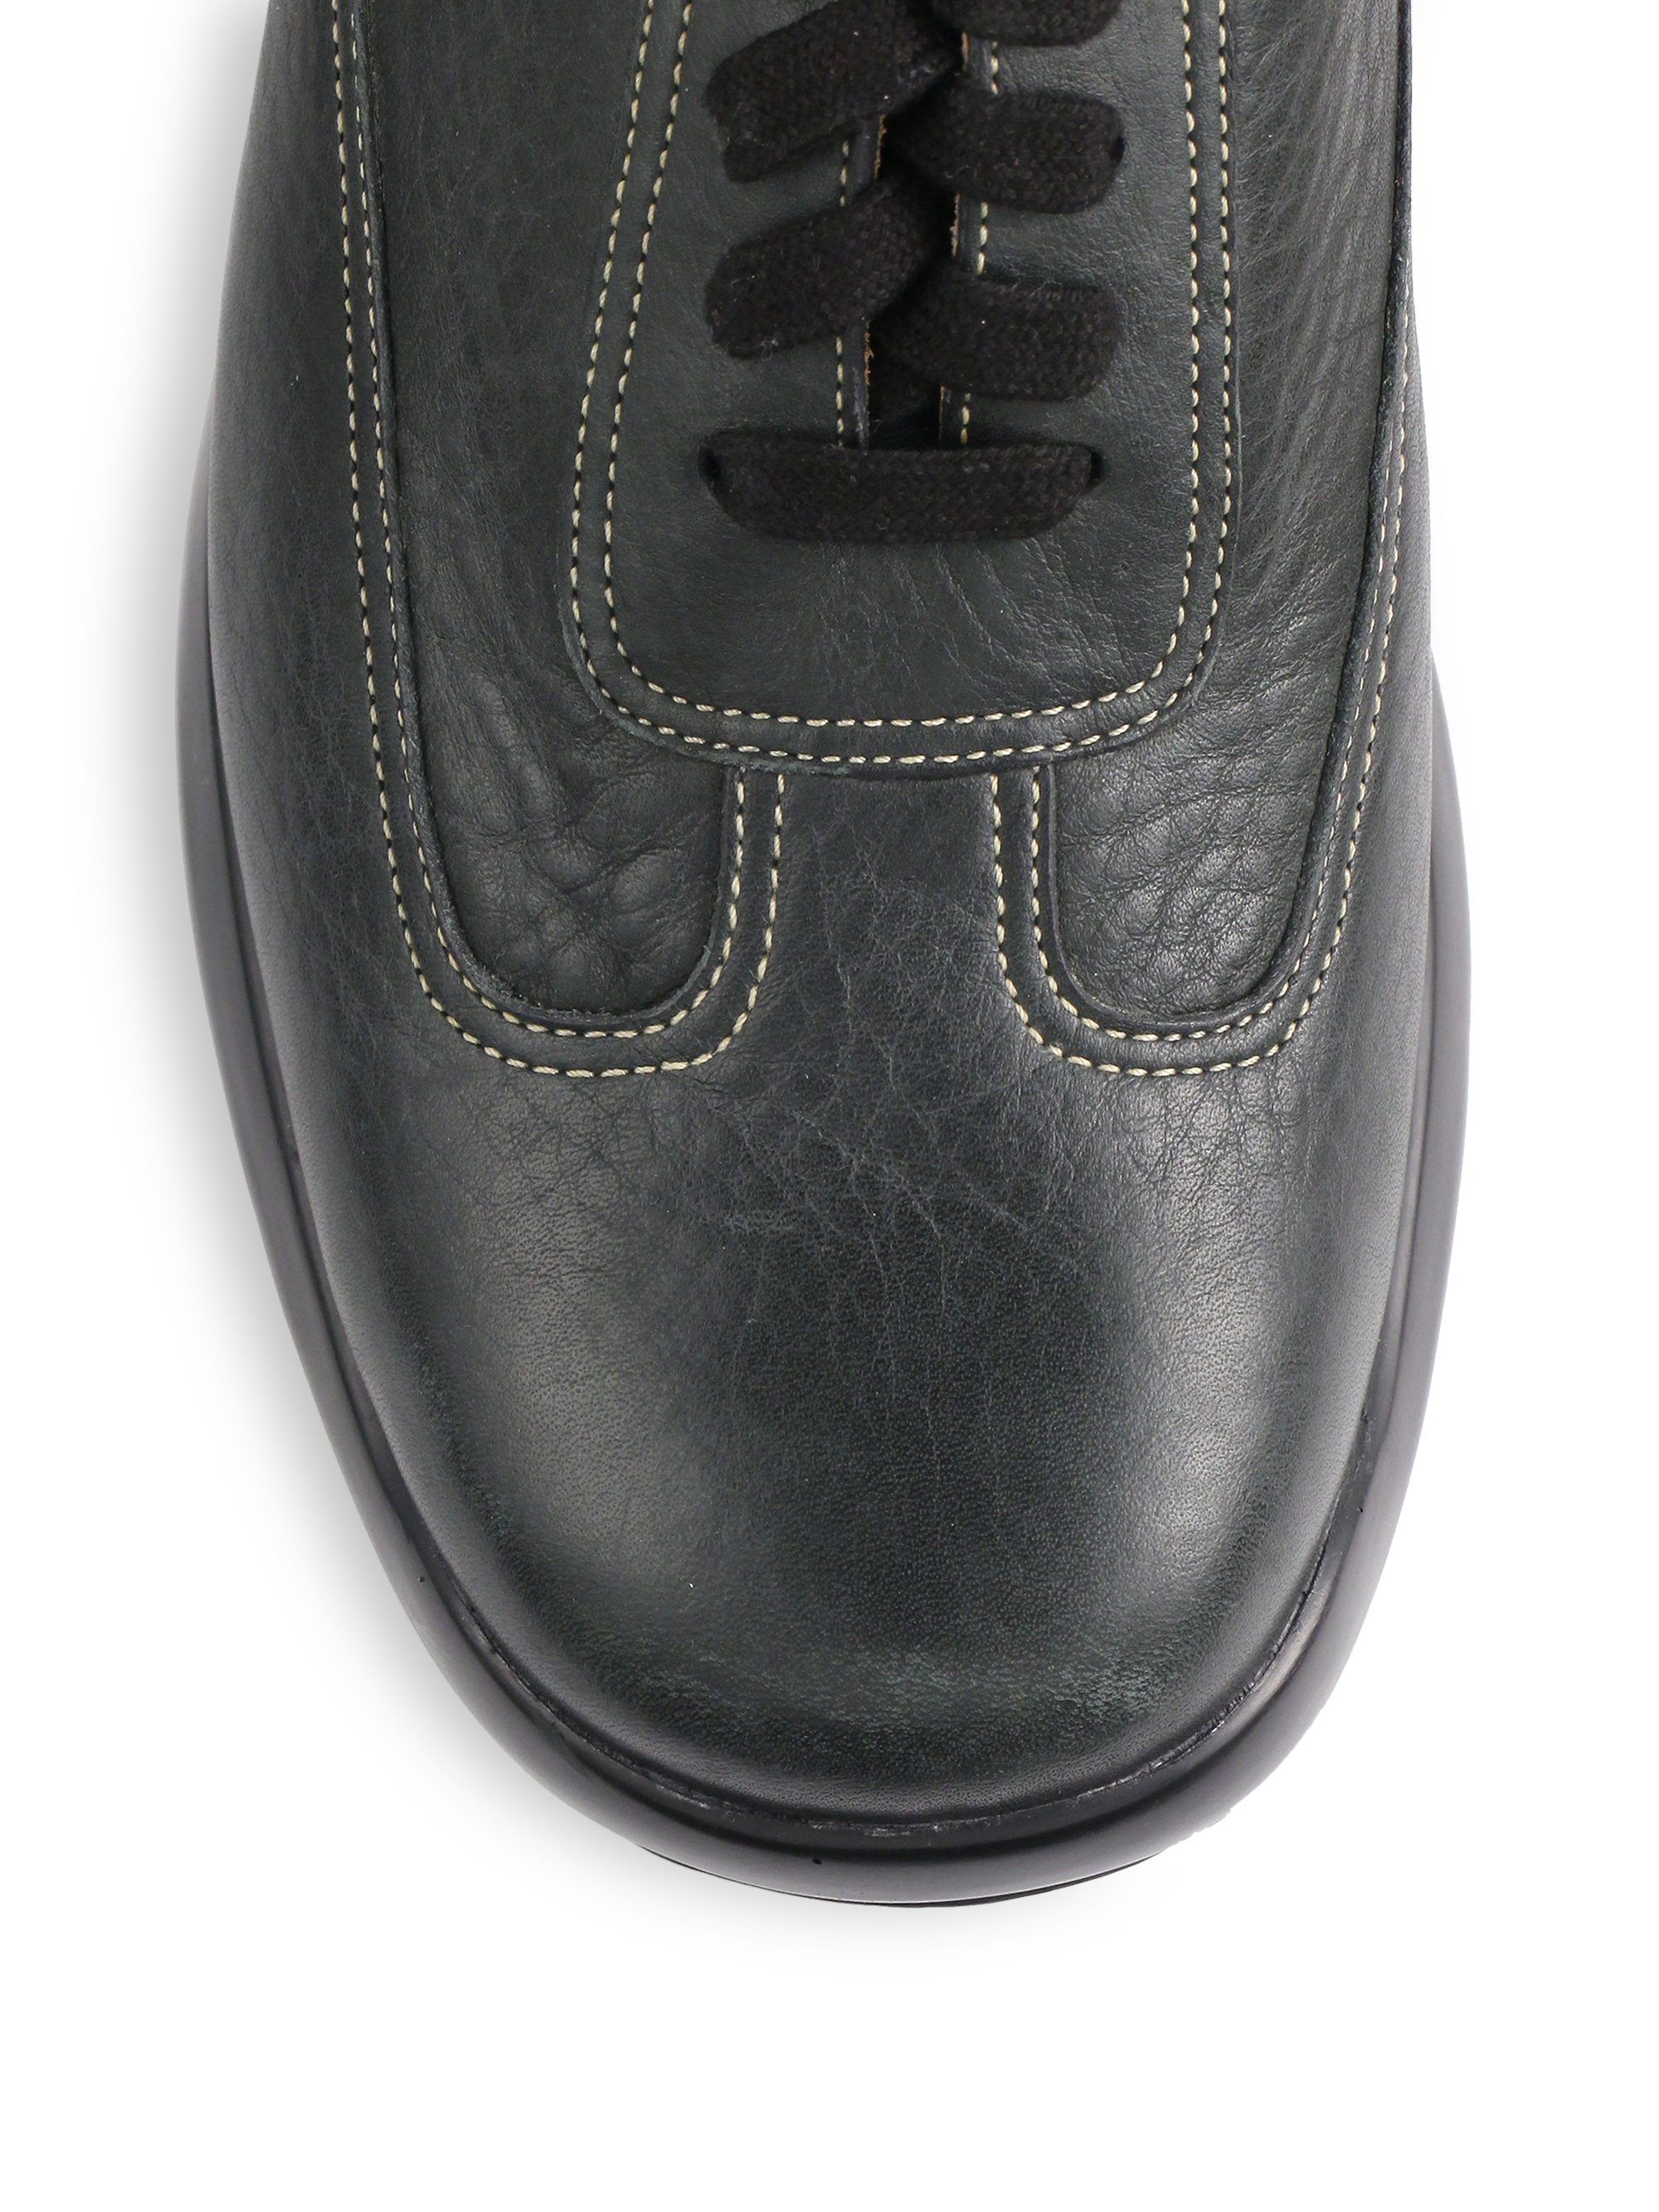 Haan Air Conner Oxfords in Black for |